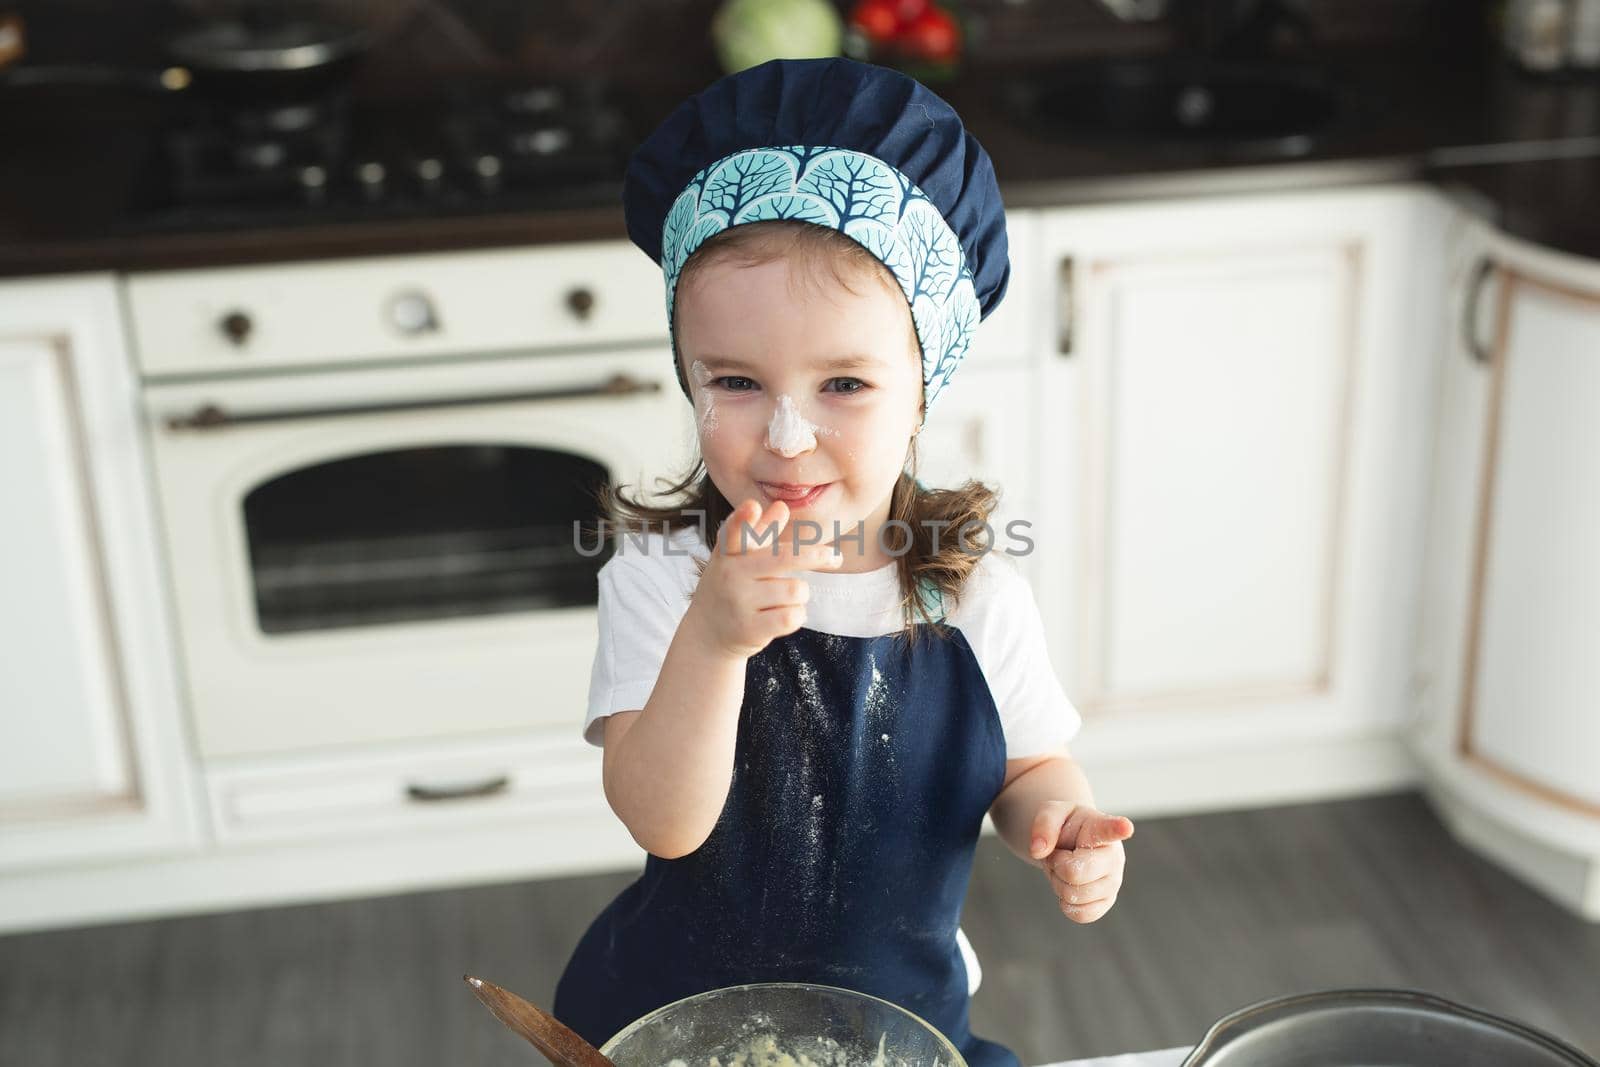 Cute little girl in apron and chef hat is flattening the dough using a rolling pin, looking at camera and smiling while baking. by StudioPeace